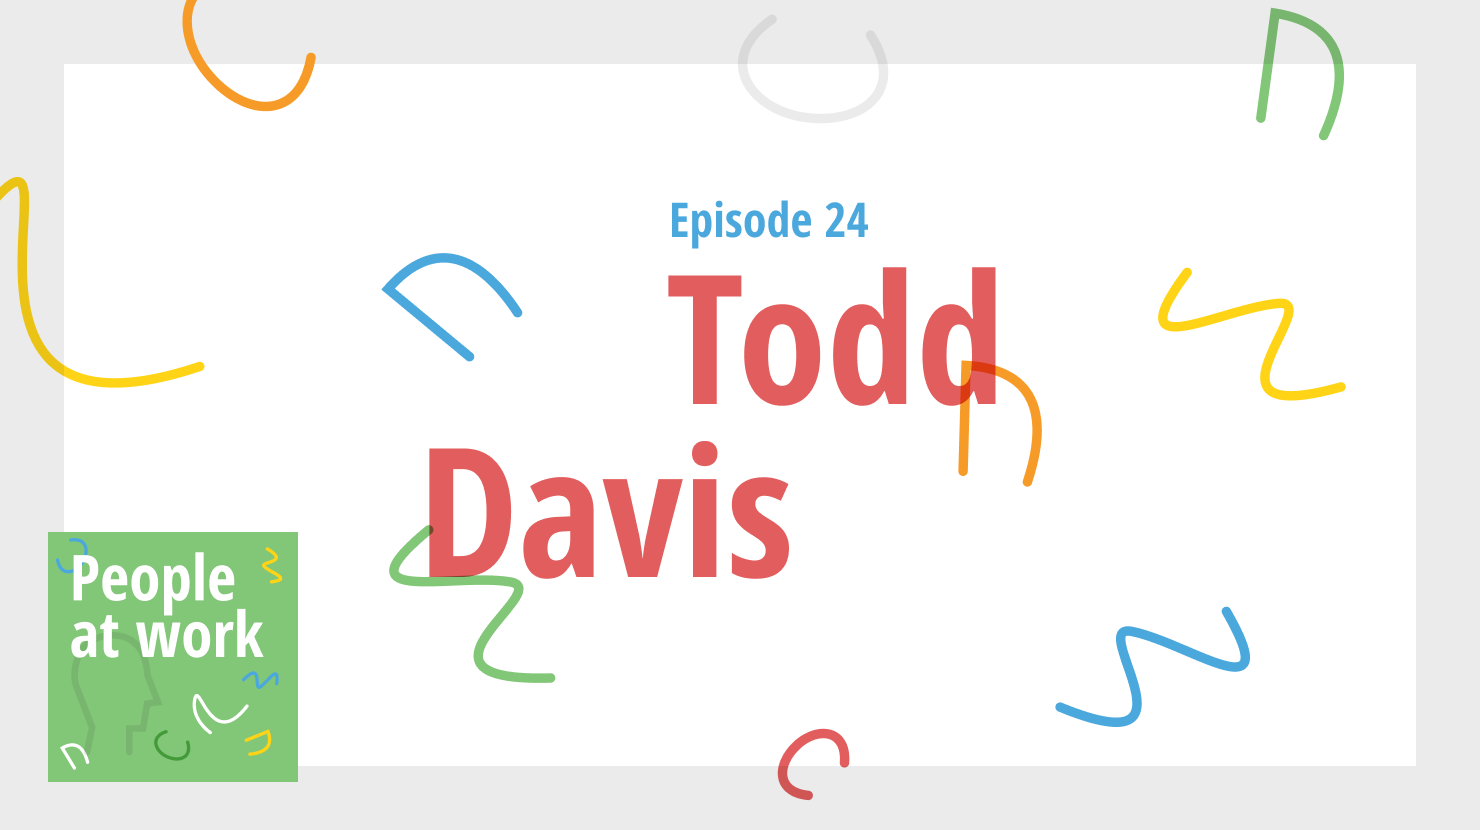 Leadership is about thee not me says Todd Davis